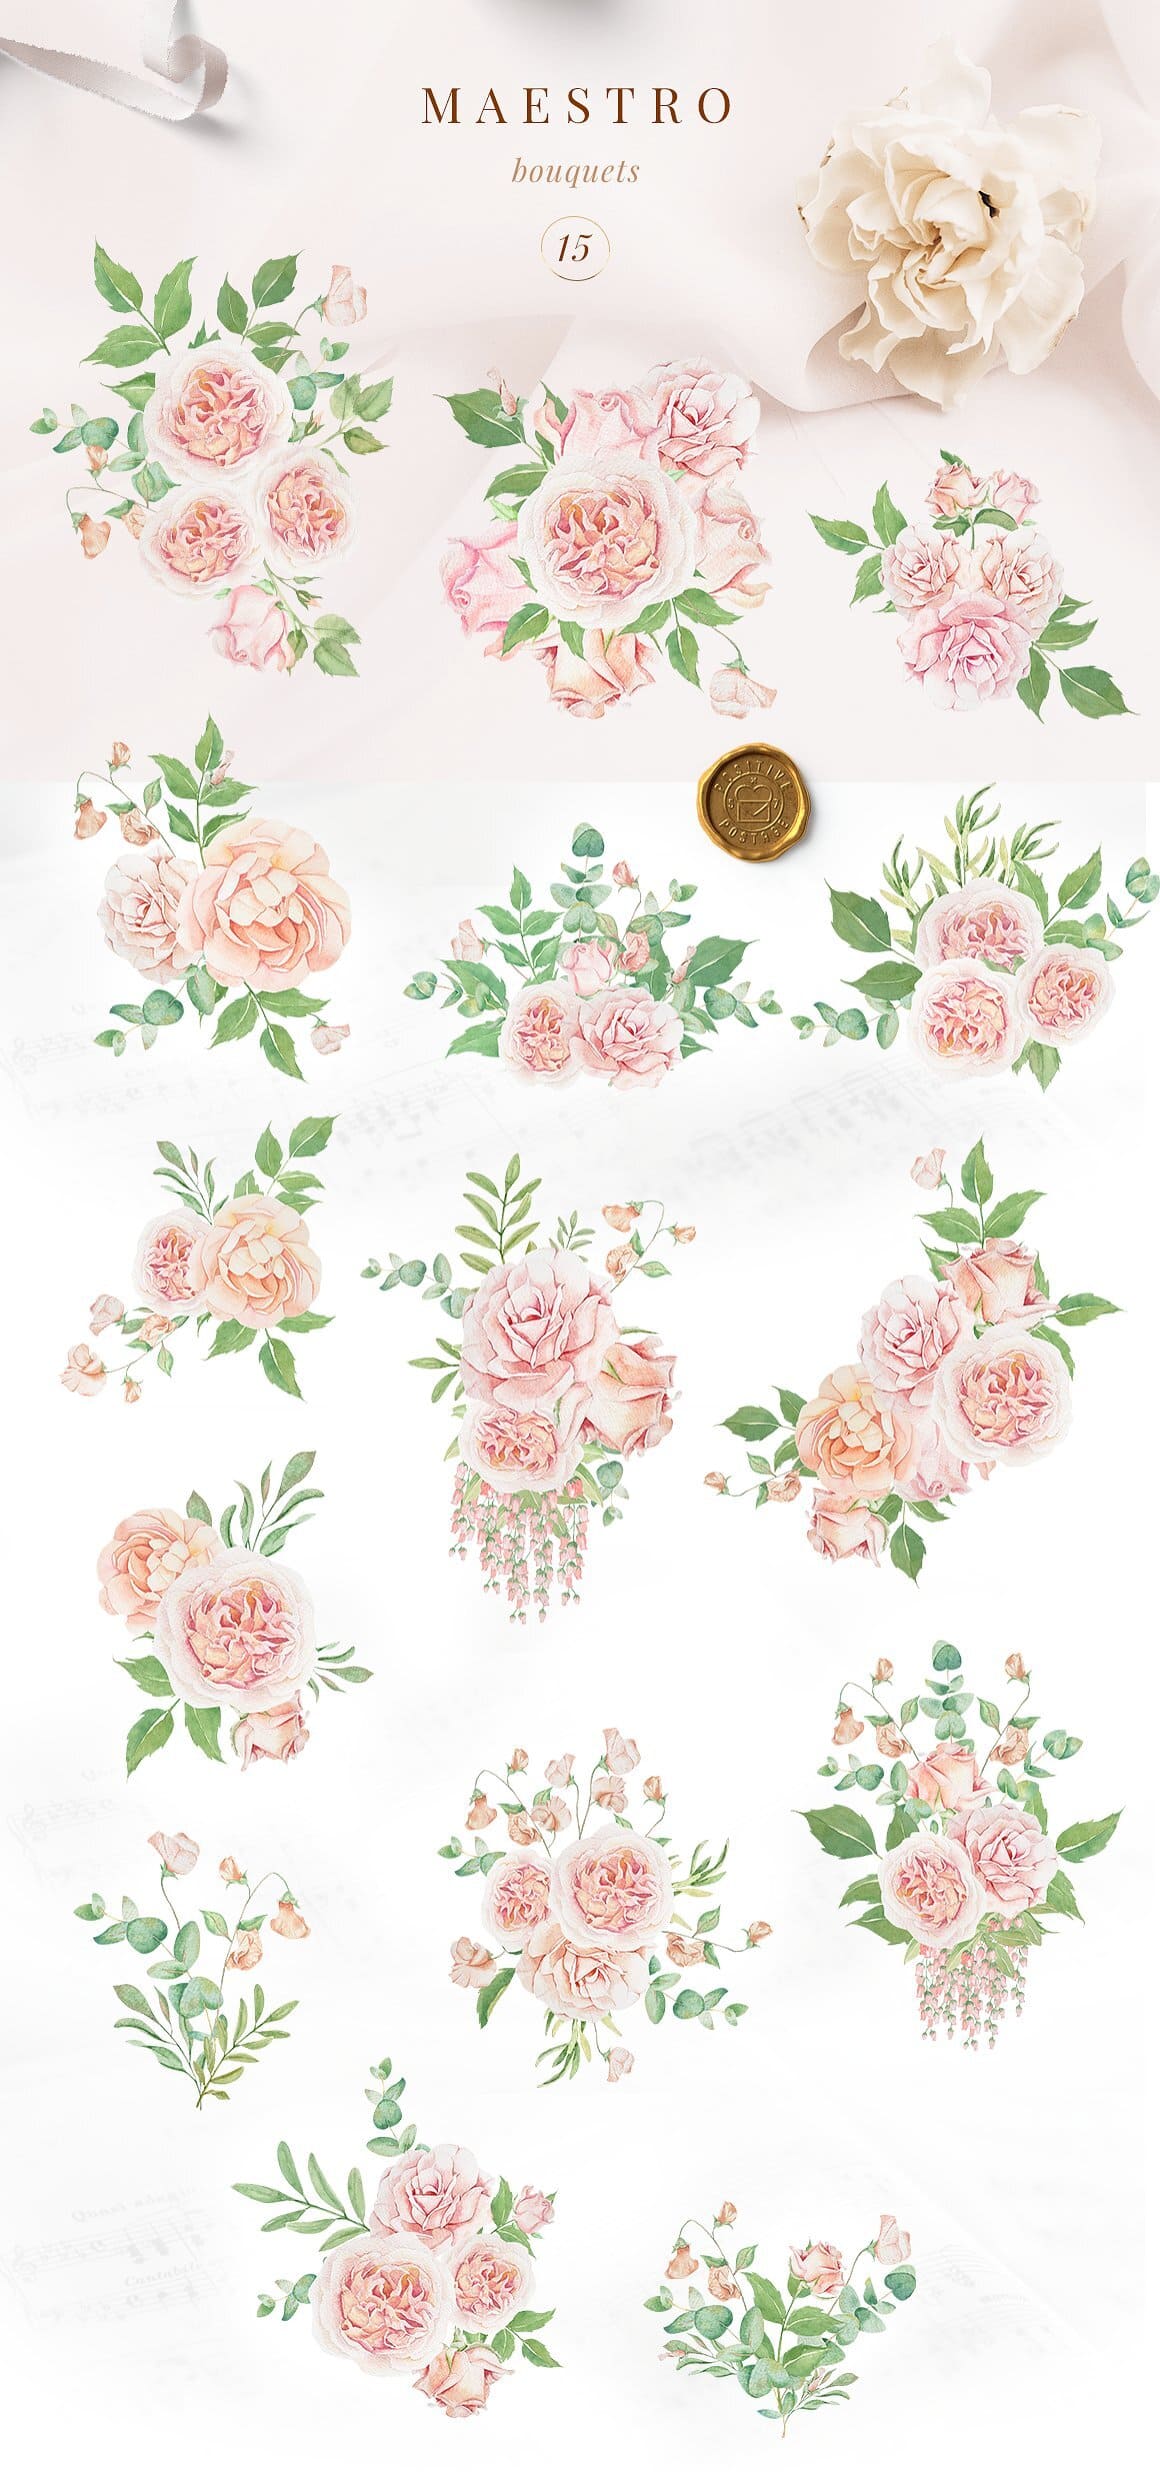 Bouquets of pink roses are drawn on a white background.